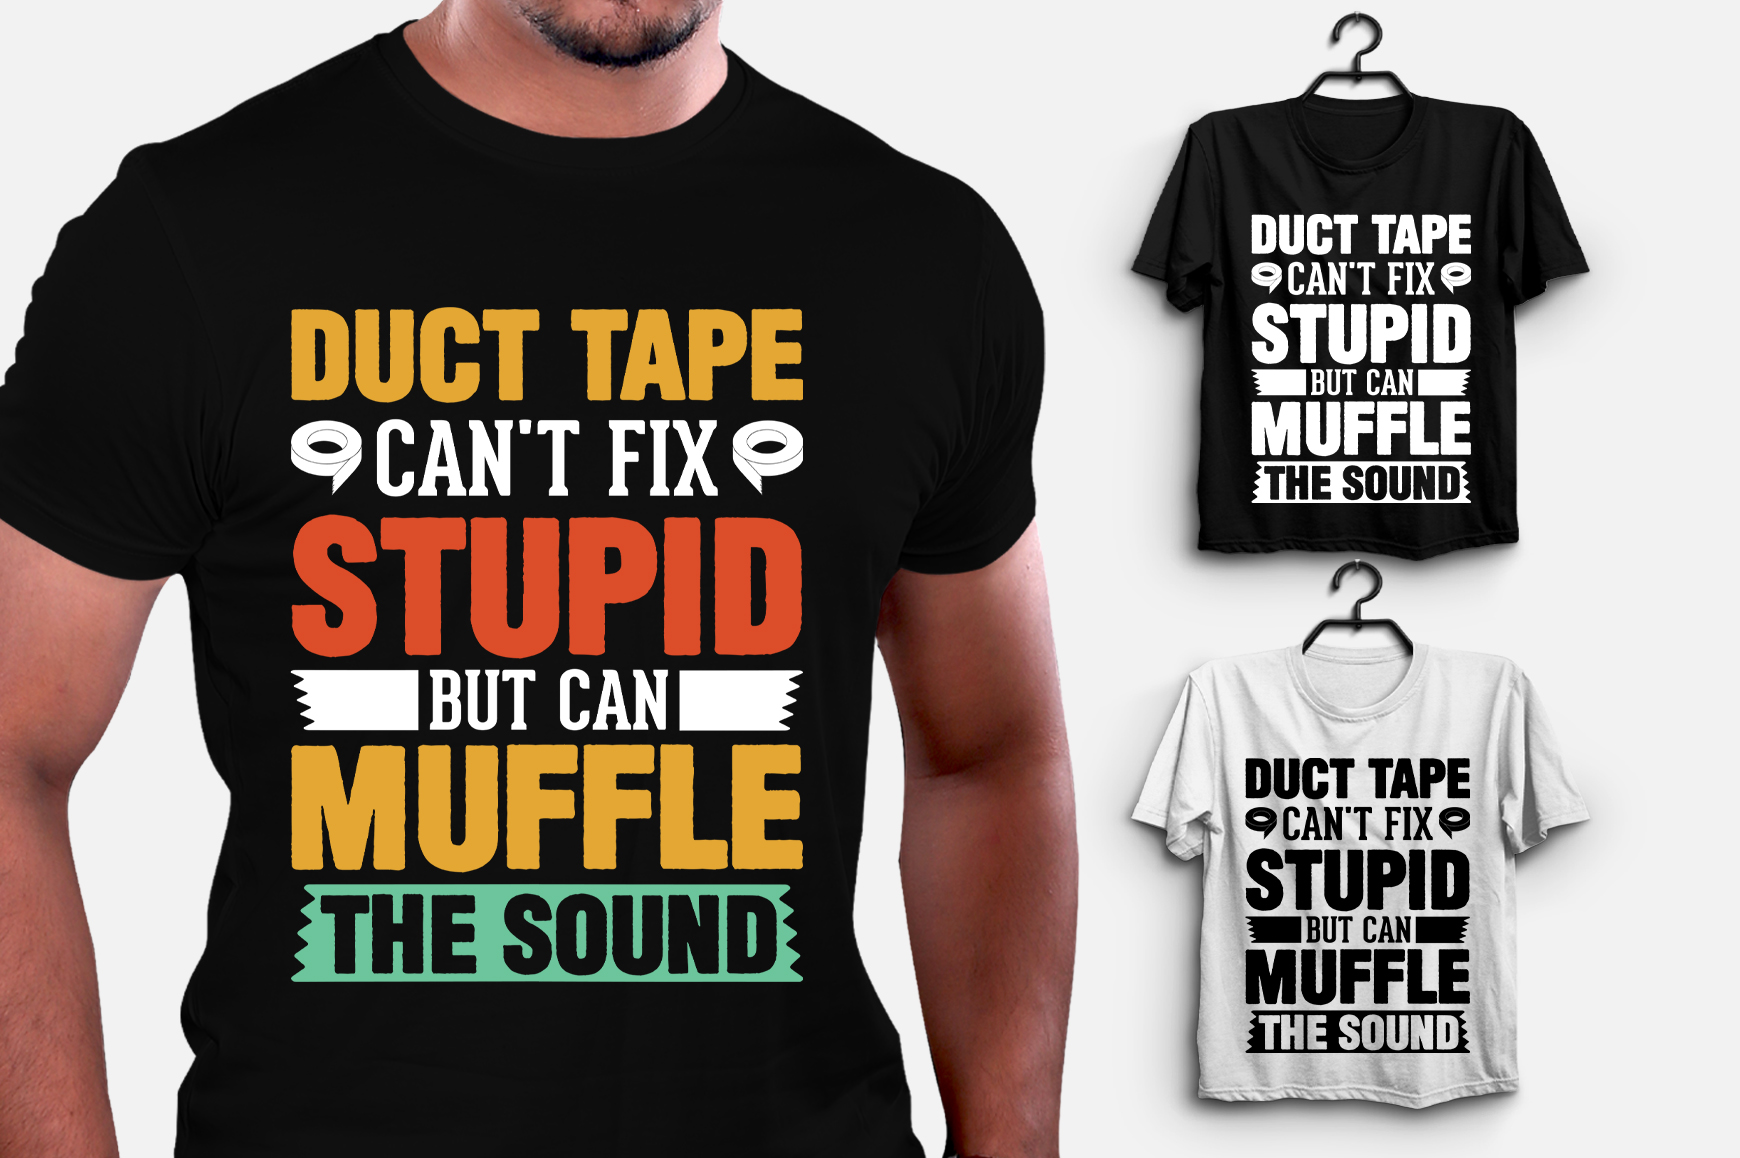 Duct Tape Can't Fix Stupid but can Muffle The Sound T-Shirt Design ...